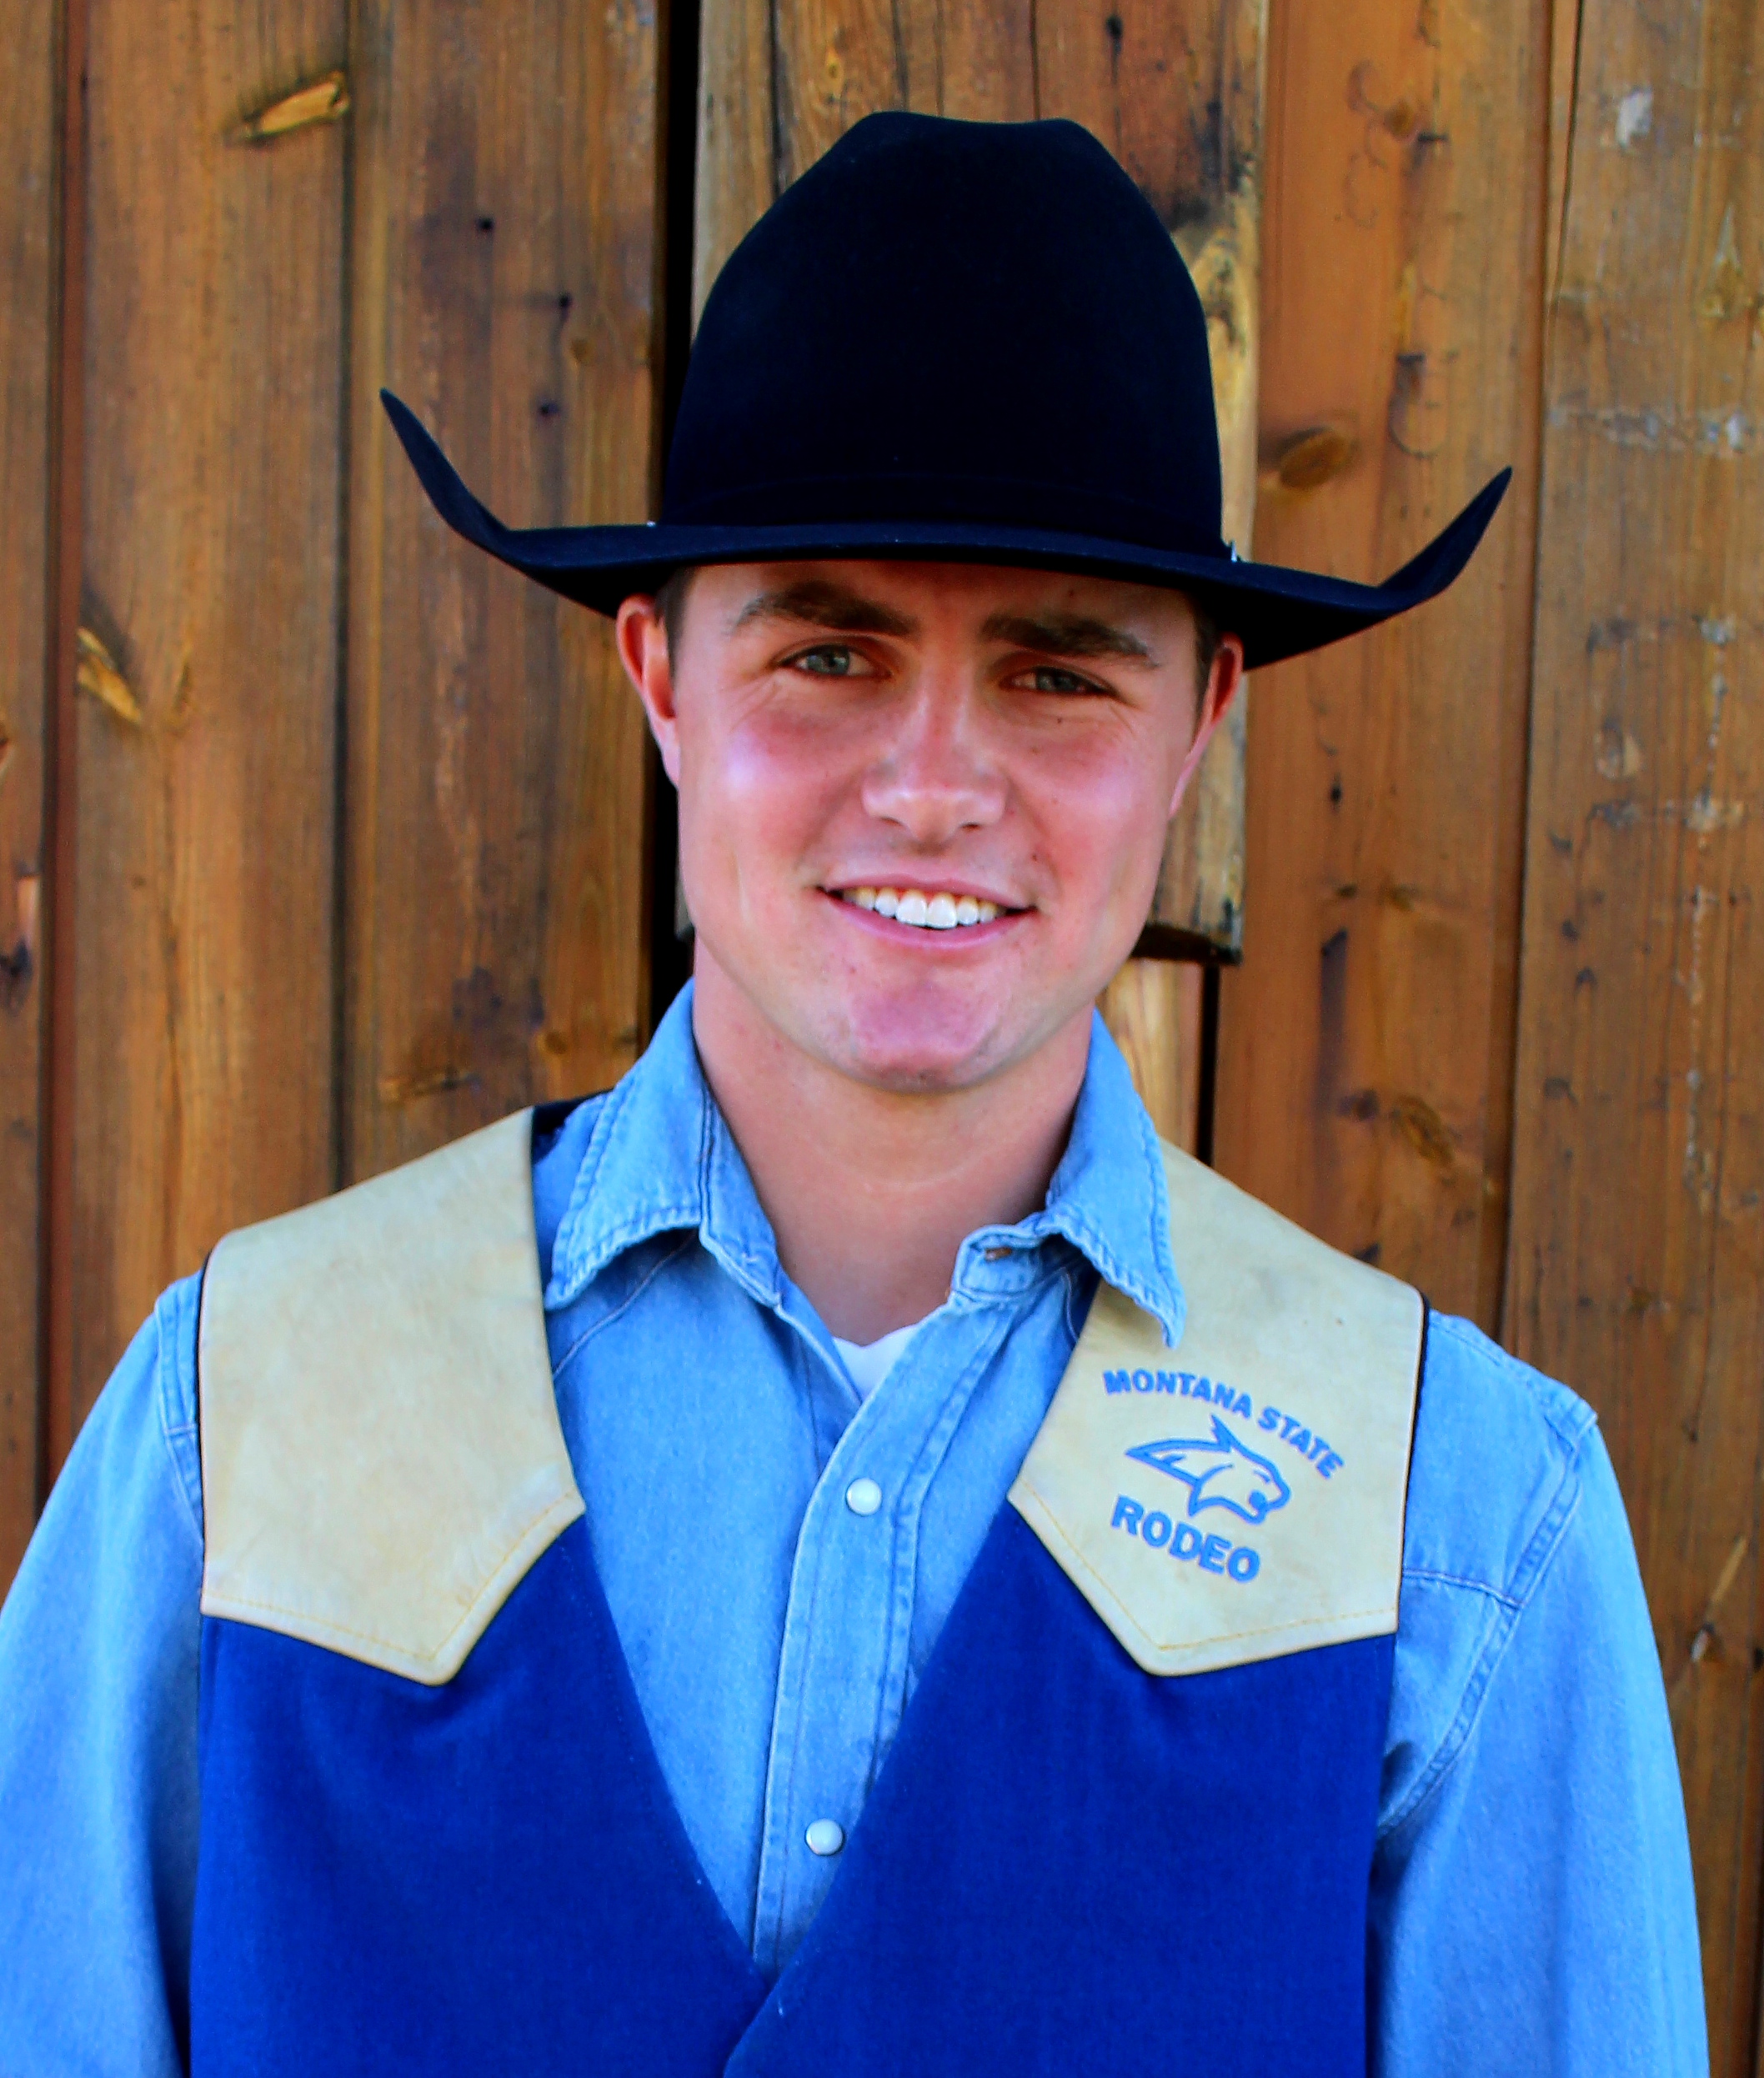 Sophomores - Bobcat Rodeo Office | Montana State University